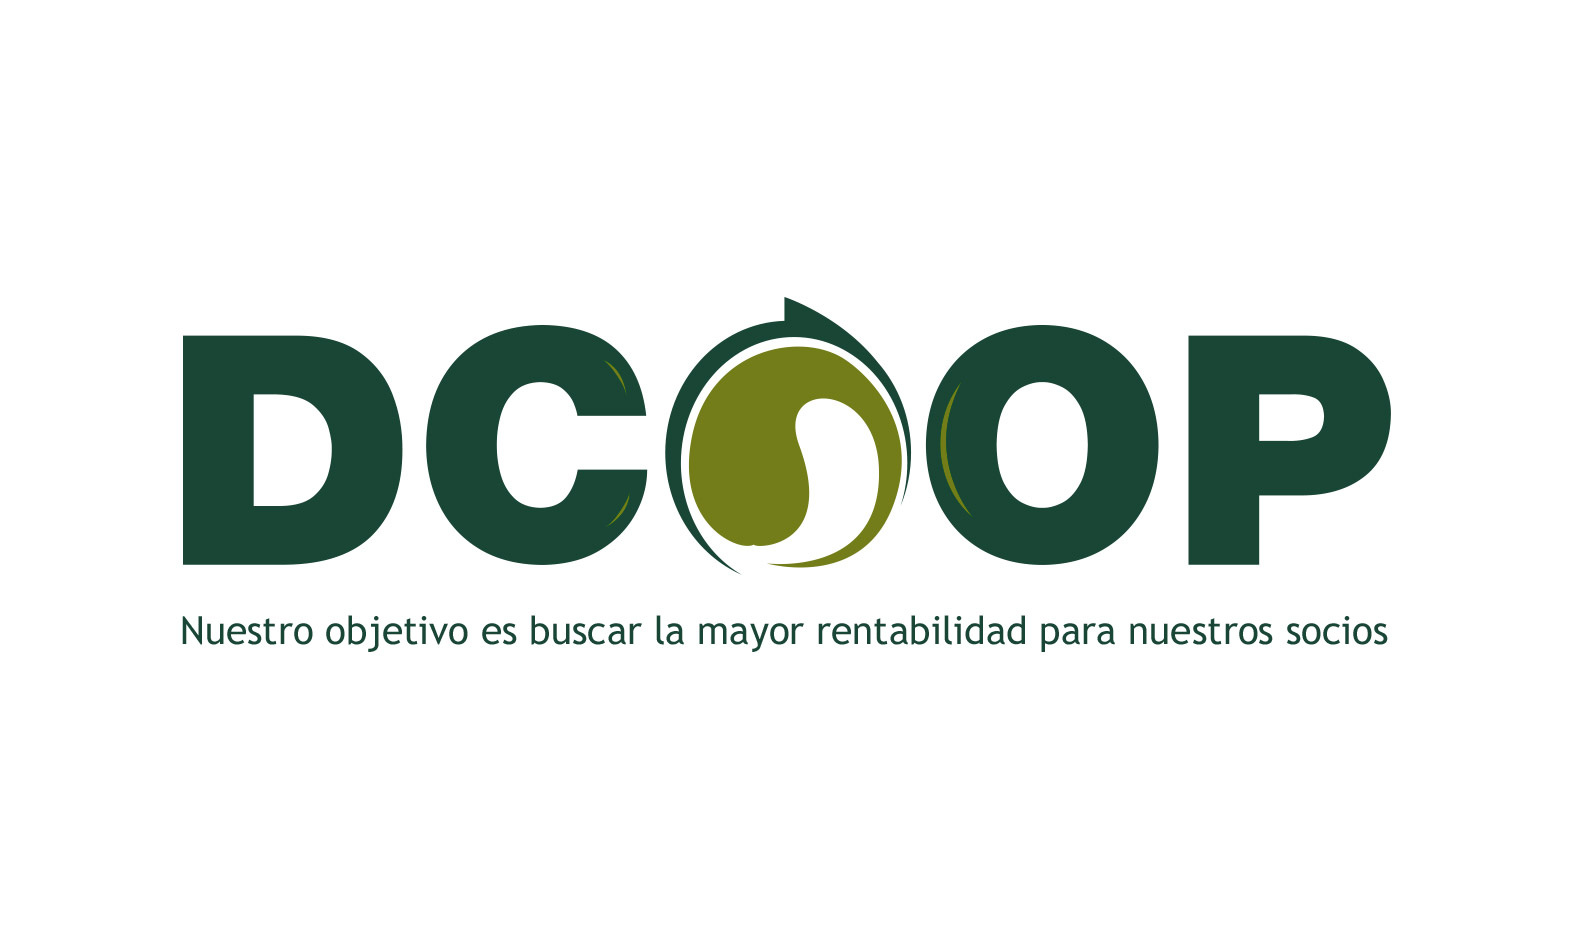 Jerez-Xeres-Sherry: 24.7.16 Jerez Cooperatives May Join D Coop